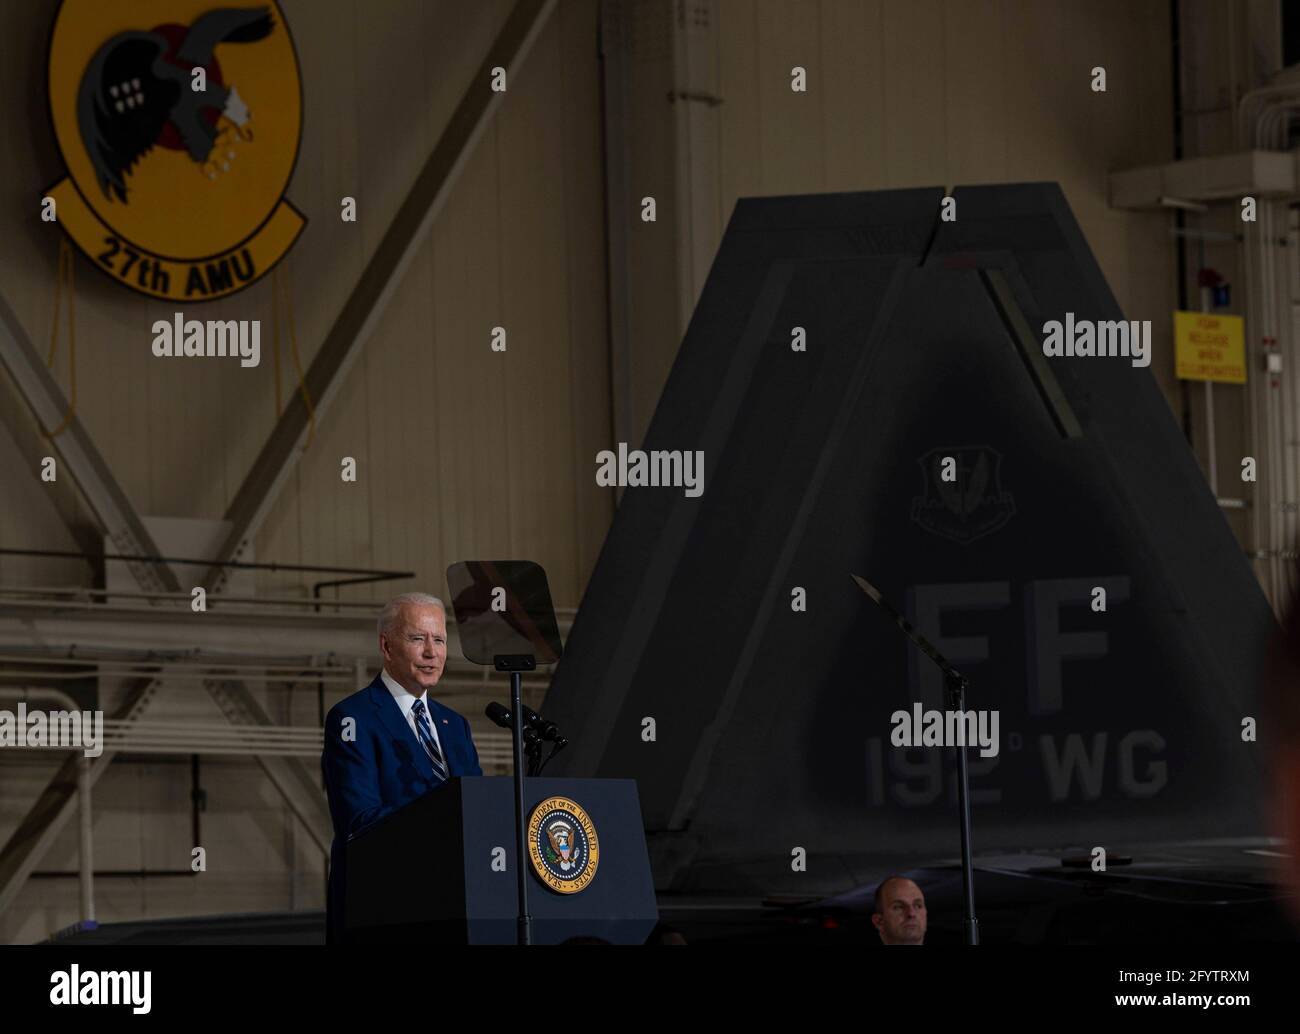 U.S President Joe Biden addresses troops during a visit to Joint Base Langley-Eustis May 28, 2021 in Newport News, Virginia. Biden spoke on the importance of military sacrifice and thanked the members for their continued dedication to defending the nation. Stock Photo